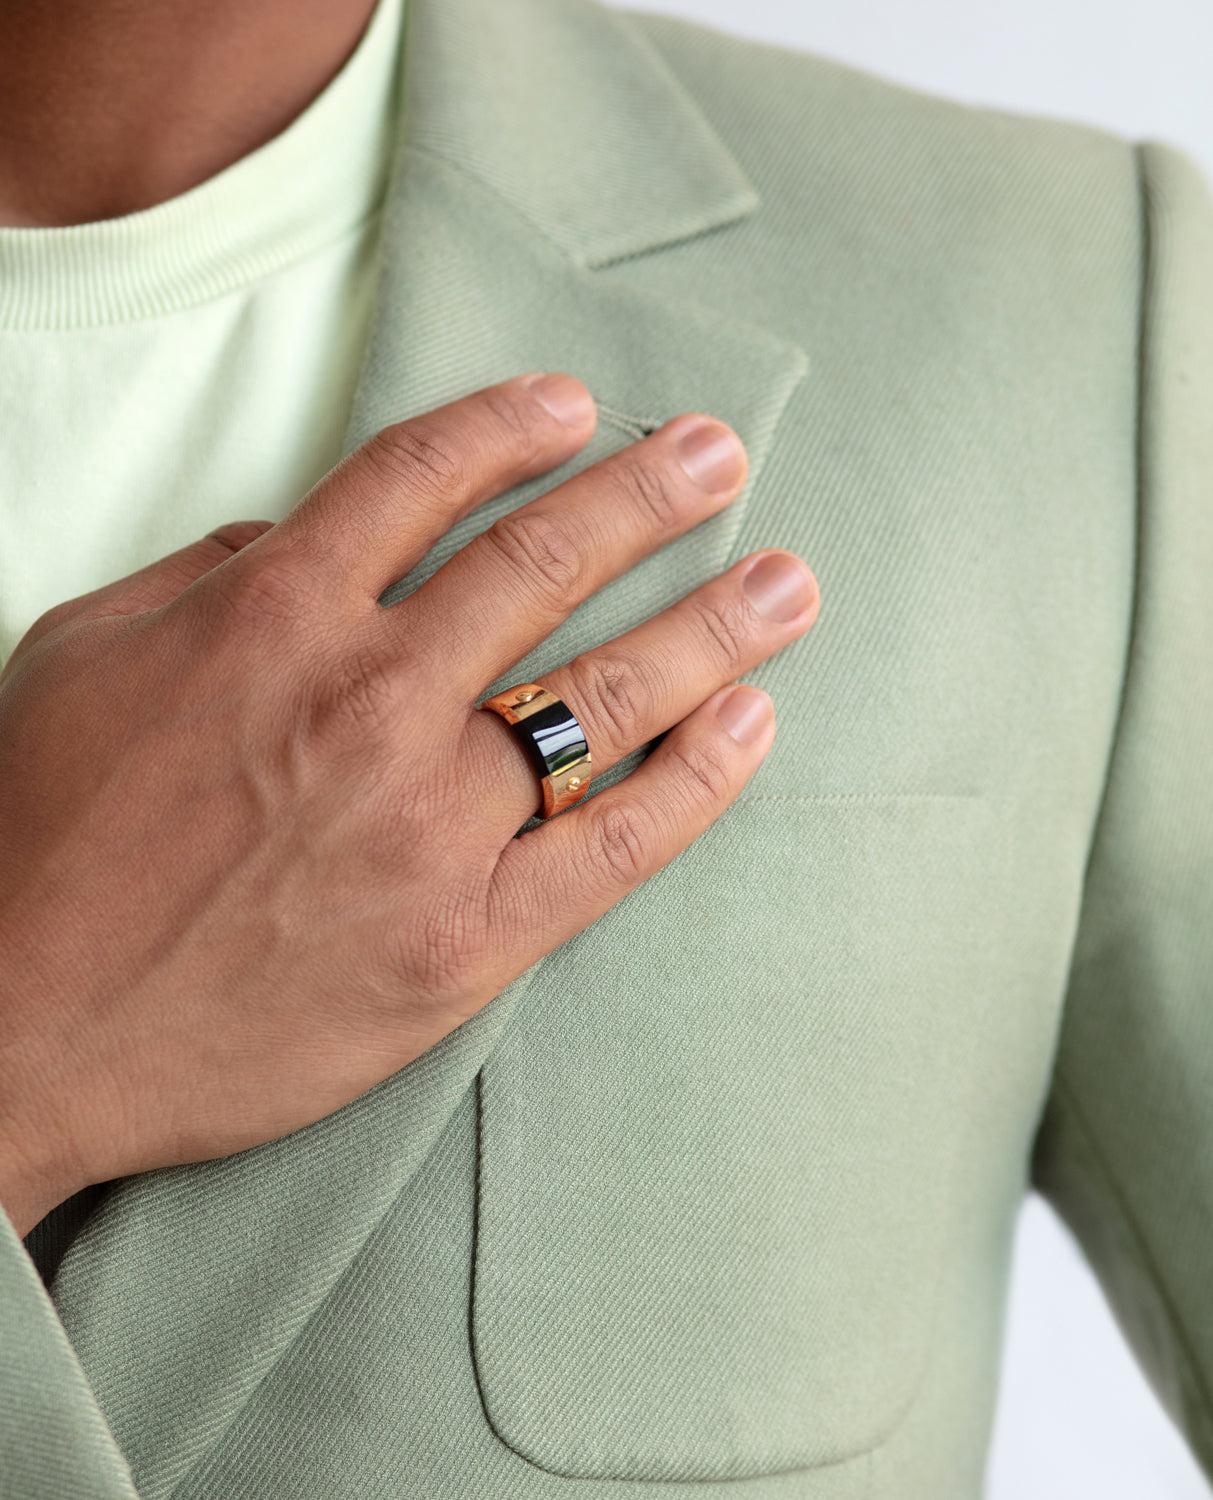 The MONTANA gold signet ring was designed with stunning classic solid gold. It includes a black onyx stone as its bold centerpiece aligned smoothly inside the ring. With signature Rockford screws, creating the combination of luxury and style in the